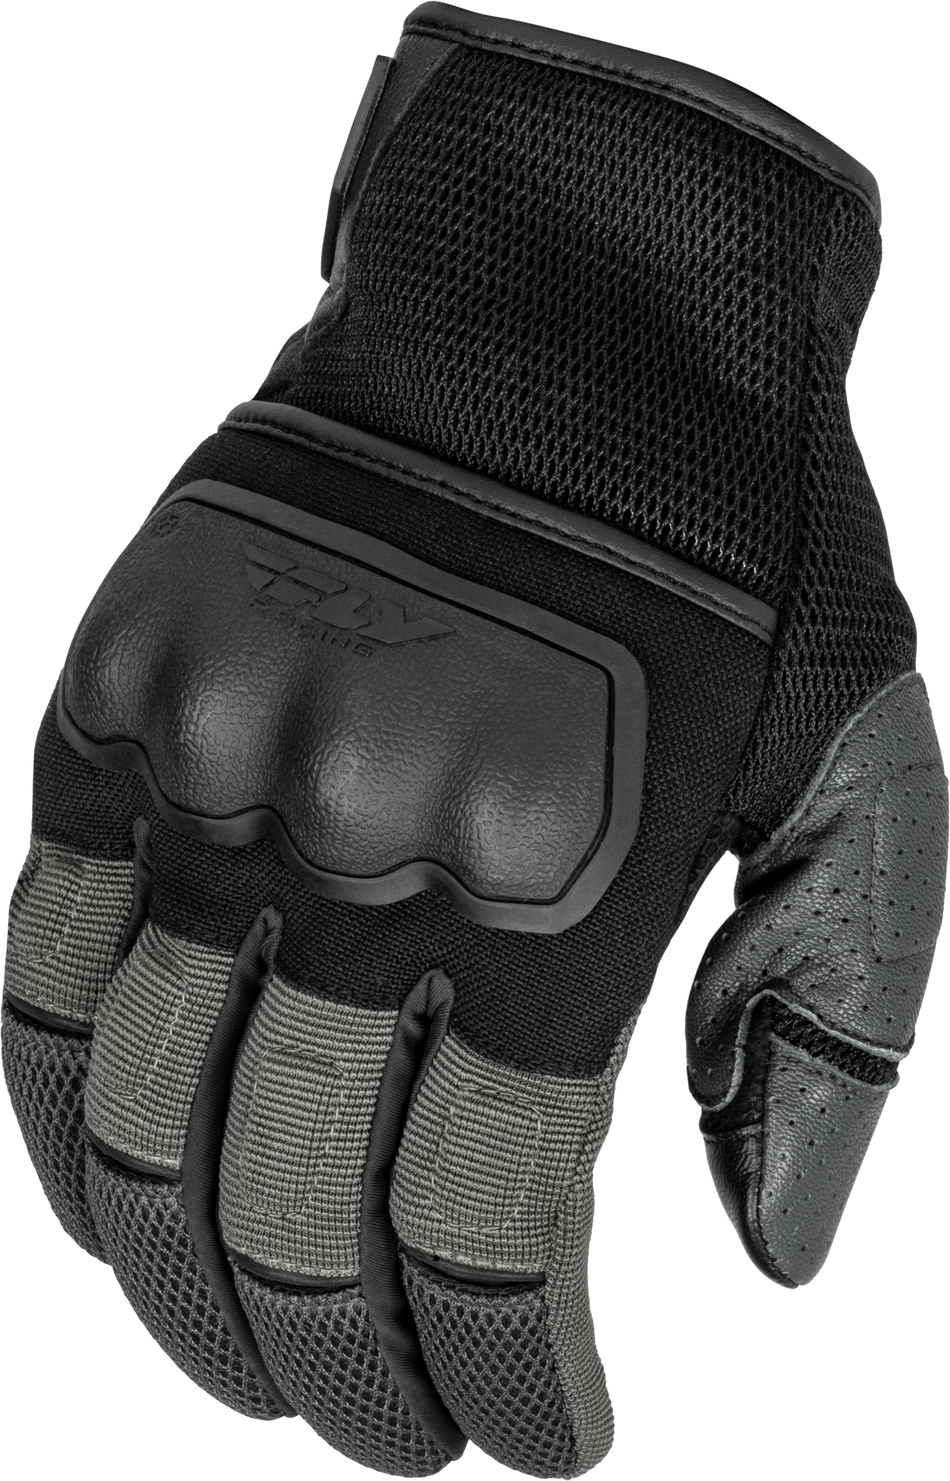 FLY RACING Coolpro Force Gloves Black/Grey Sm 476-4126S